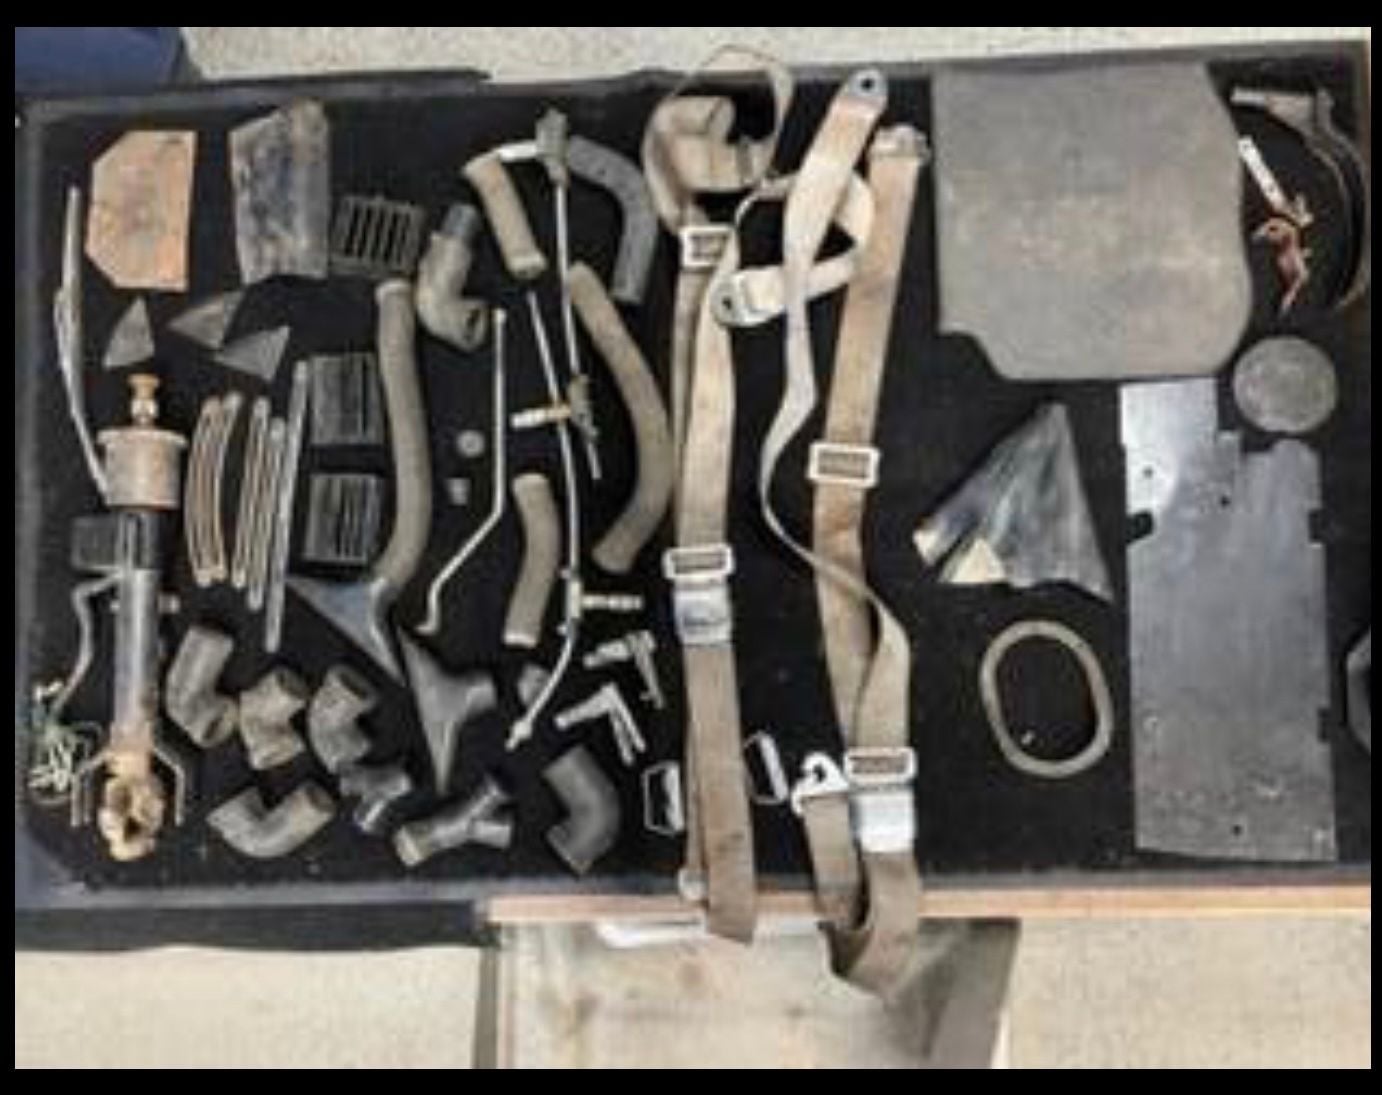 Miscellaneous - Jaguar E-Type/XKE Parts Lot (Series 1, 1.5 and 2) - Used - 1961 to 1971 Jaguar XKE - Los Angeles, CA 90027, United States